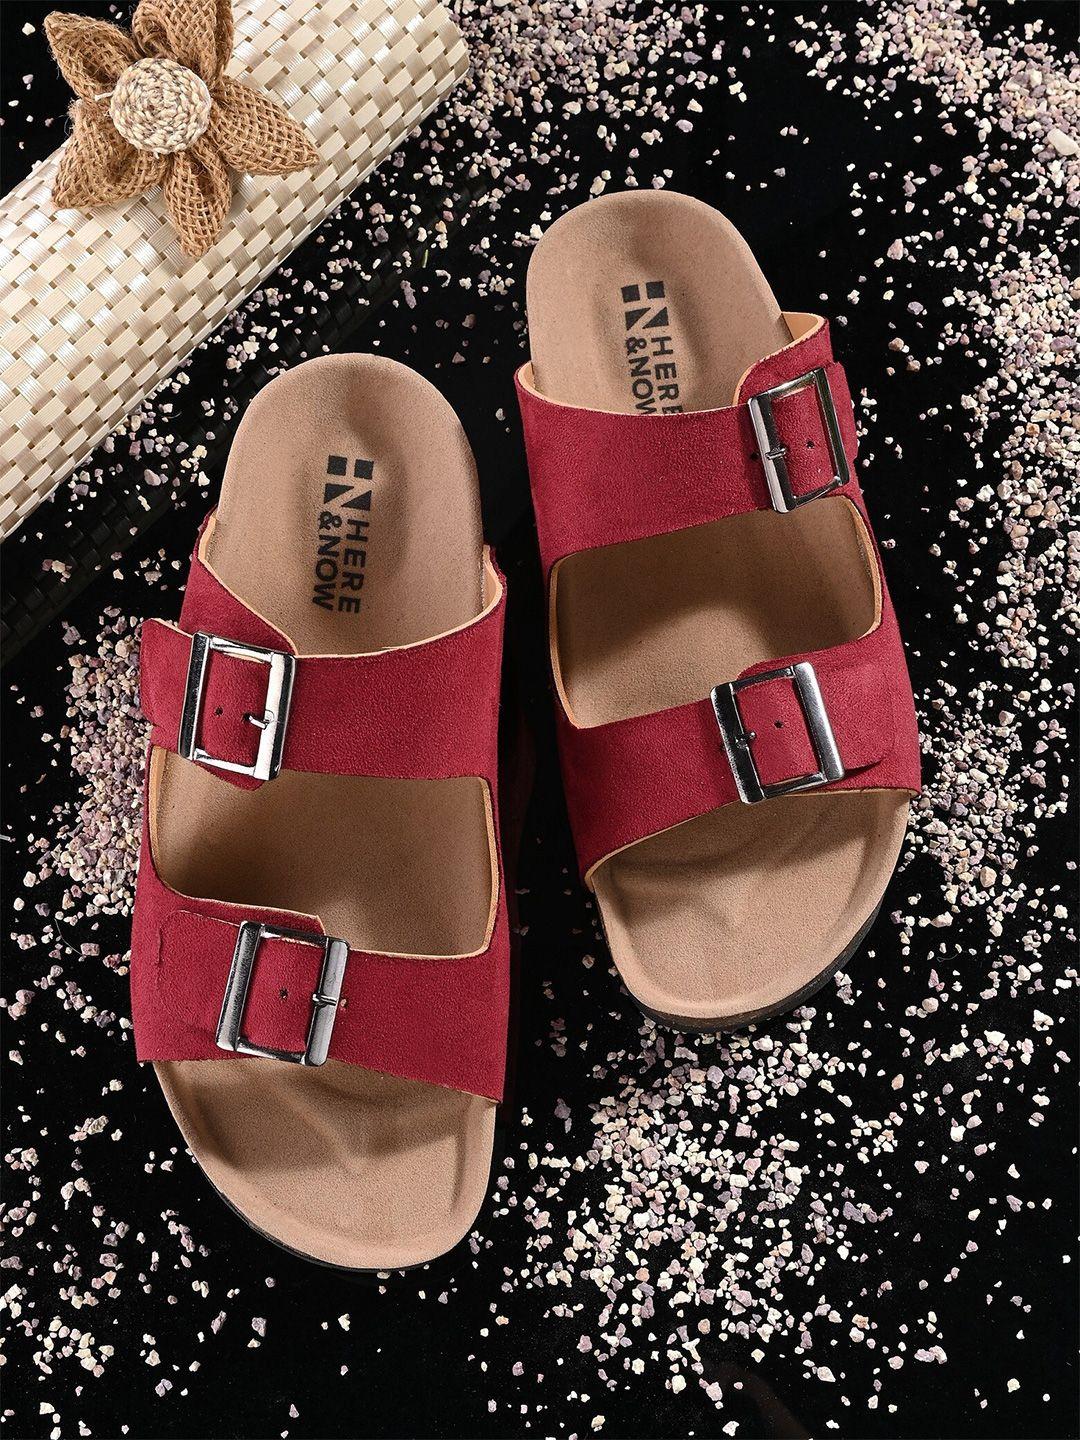 here&now women two strap comfort open toe flats with buckle detail